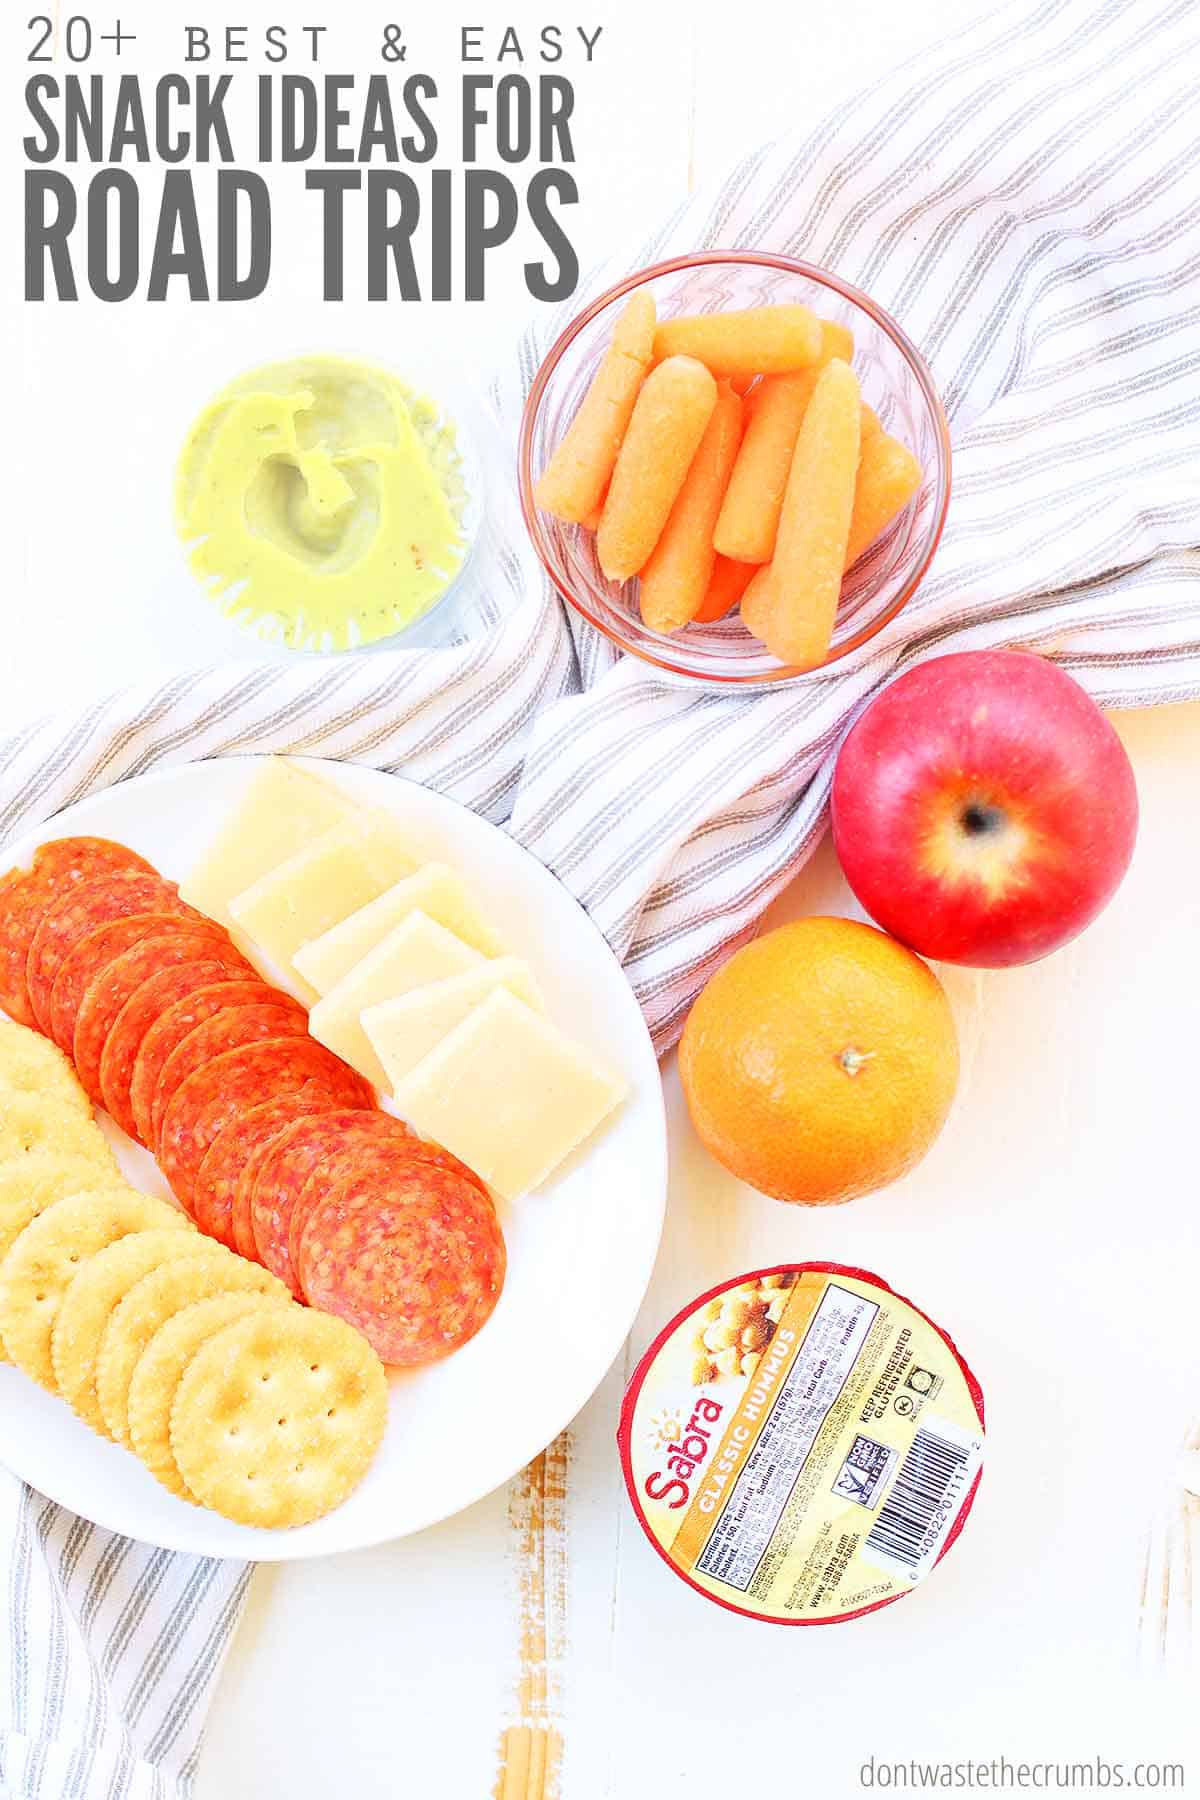 20+ Best Snack for Road Trips are fruits and veggies, single serve hummus and cheese slices. 